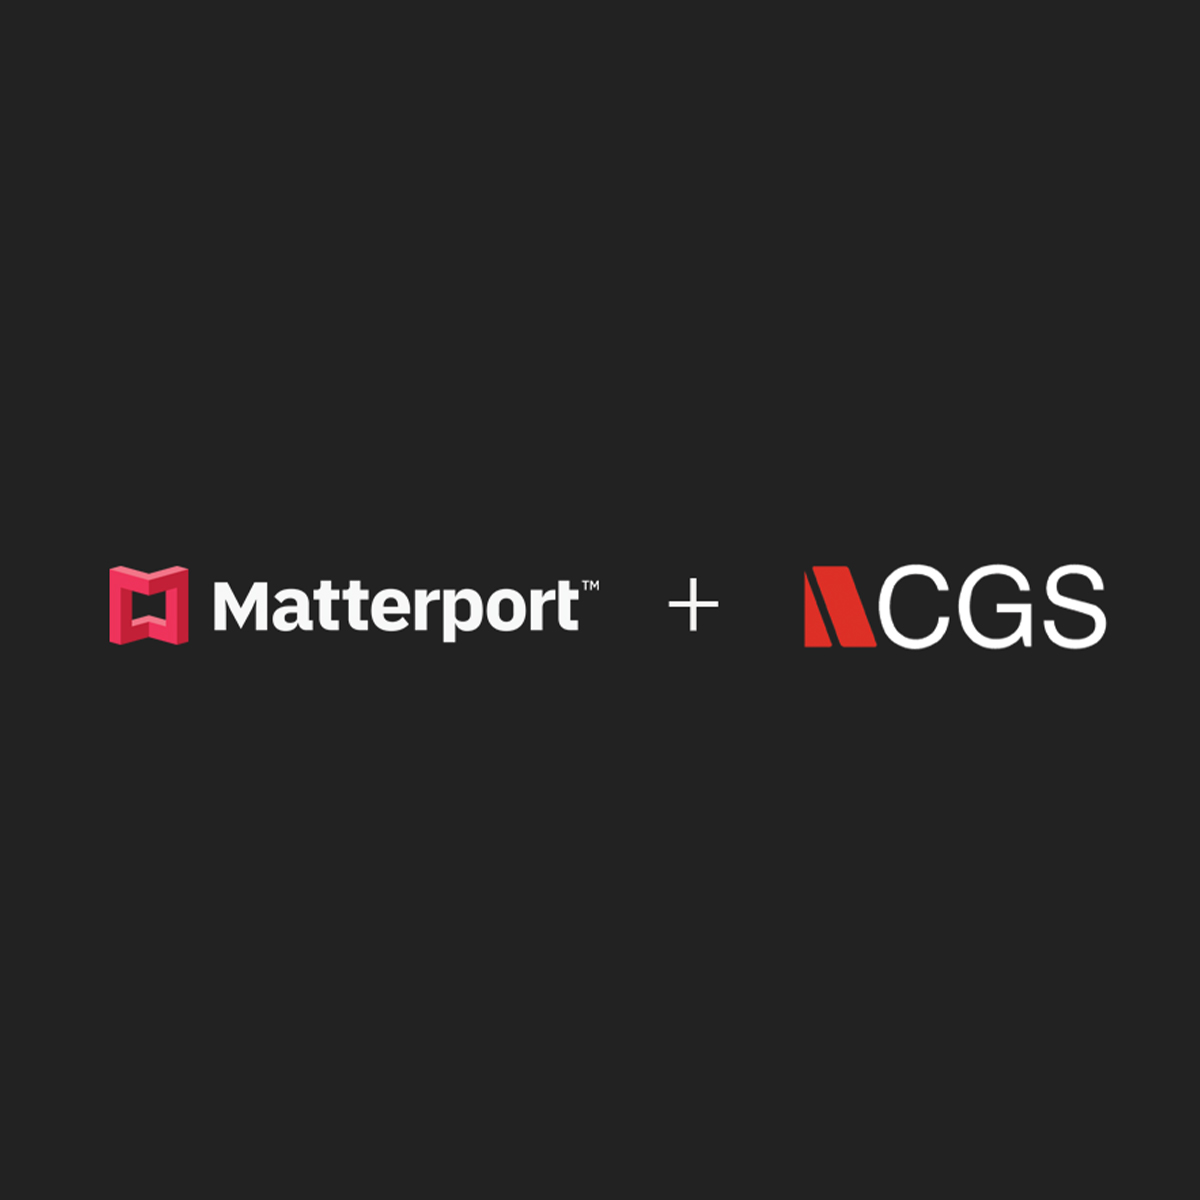 CGS and Matterport Partner to Deliver Virtual Training Solutions for Front-line Workers Across the Fortune 500